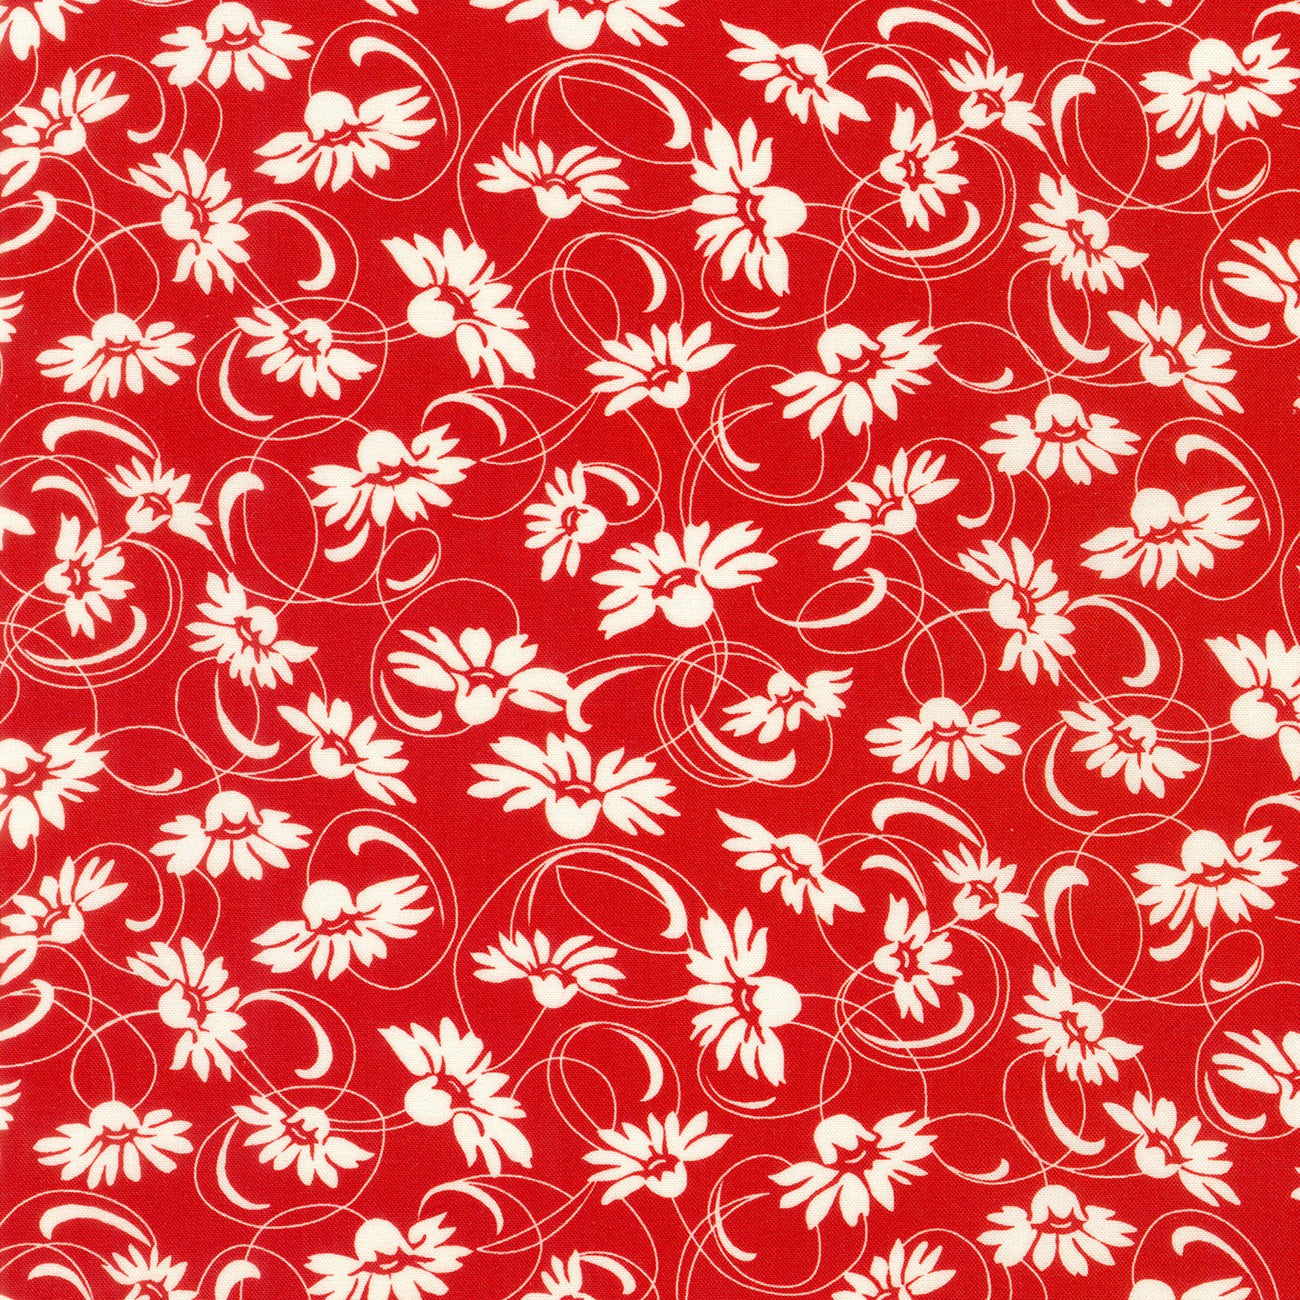 Daisy's Redwork / Swirling Daisies - Red